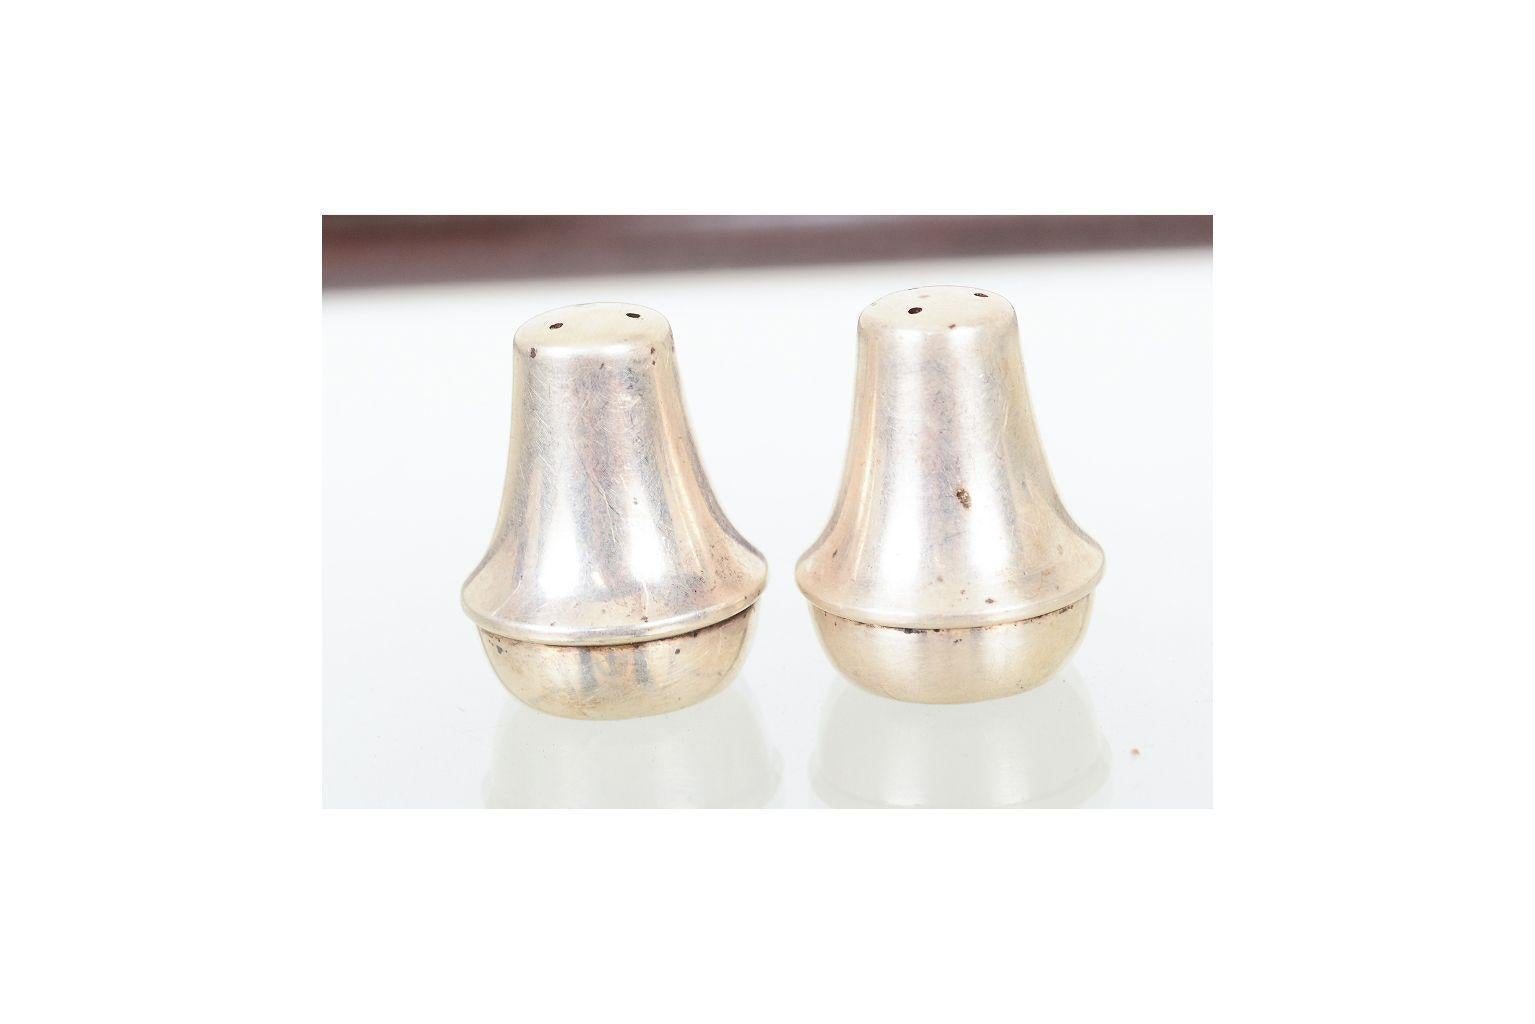 For your consideration a pair of salt and paper shakers in sterling silver. Mexico 1950s made in Mexico stamped with EAGLE 20 hallmark Sterling 925 Plat-Mex SA similar to design of William Spratling and Antonio Pineda. Measures: 1 1/4